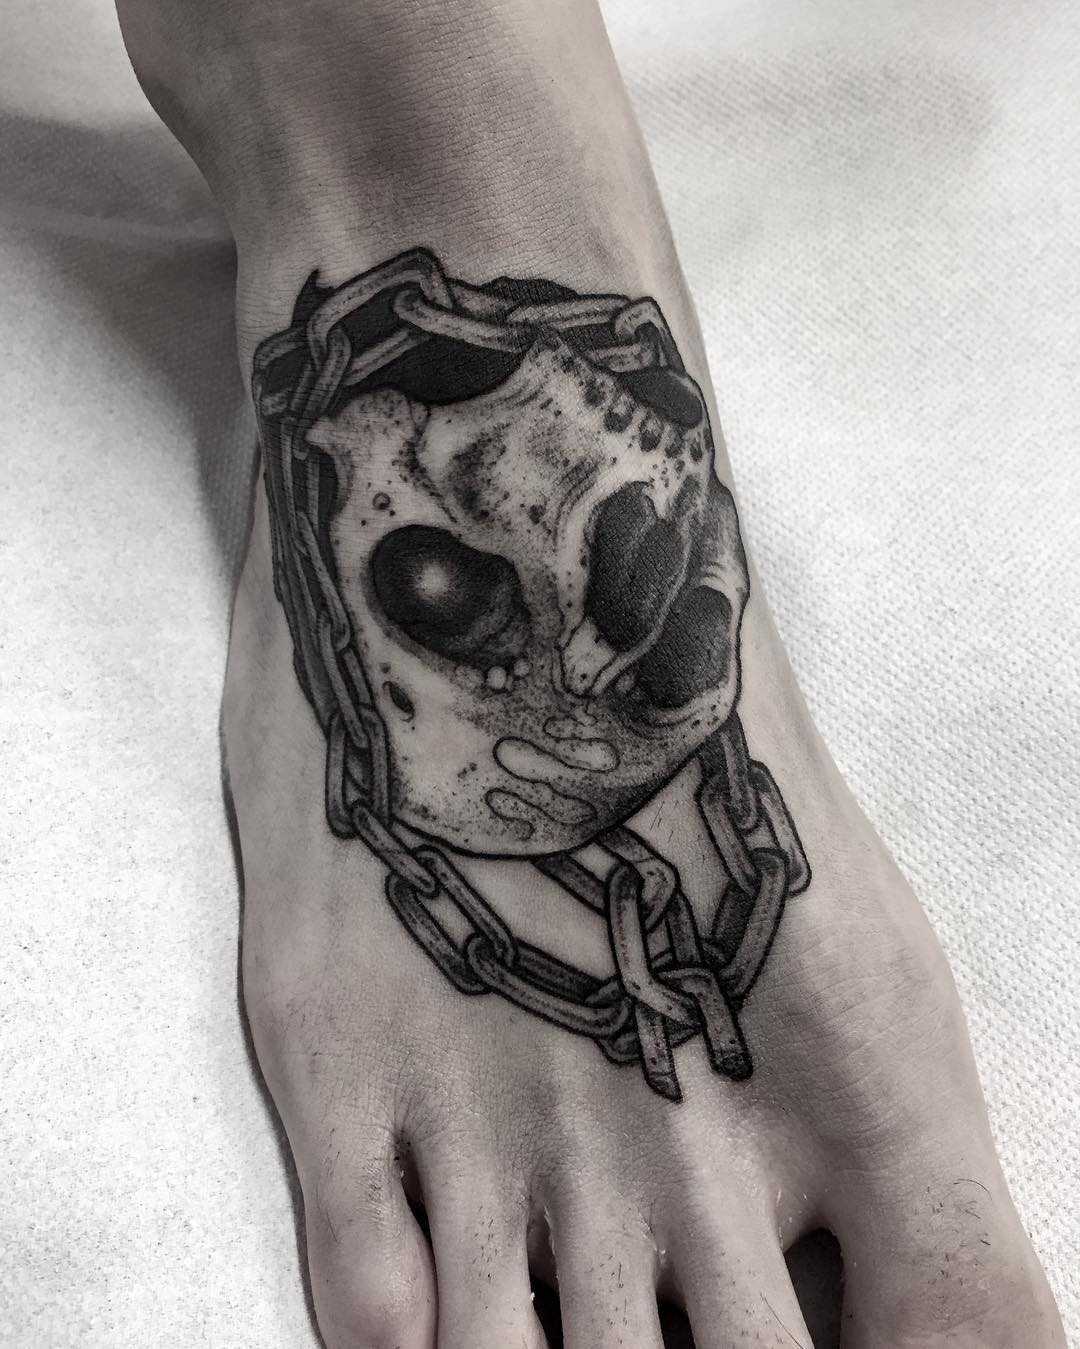 Skull and chain tattoo on the foot